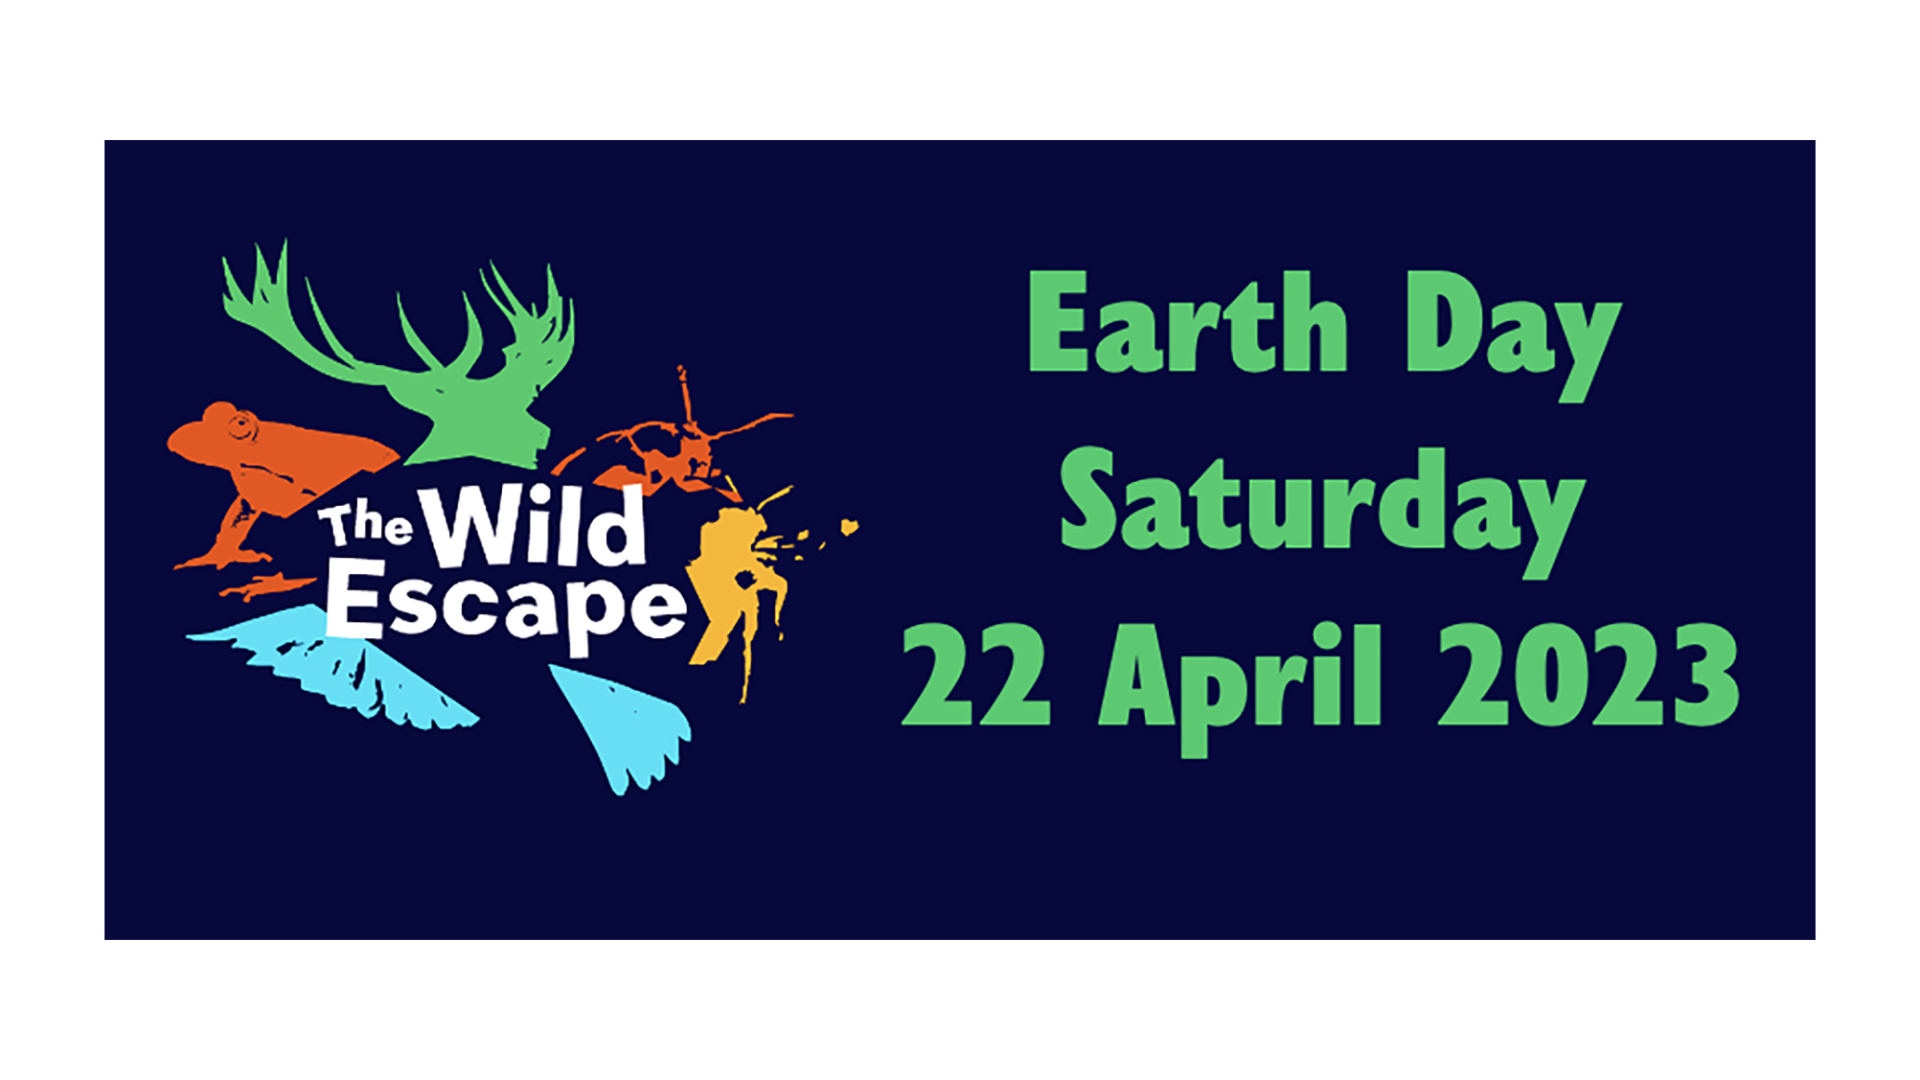 Earth Day Saturday 22nd April in green font on a navy background